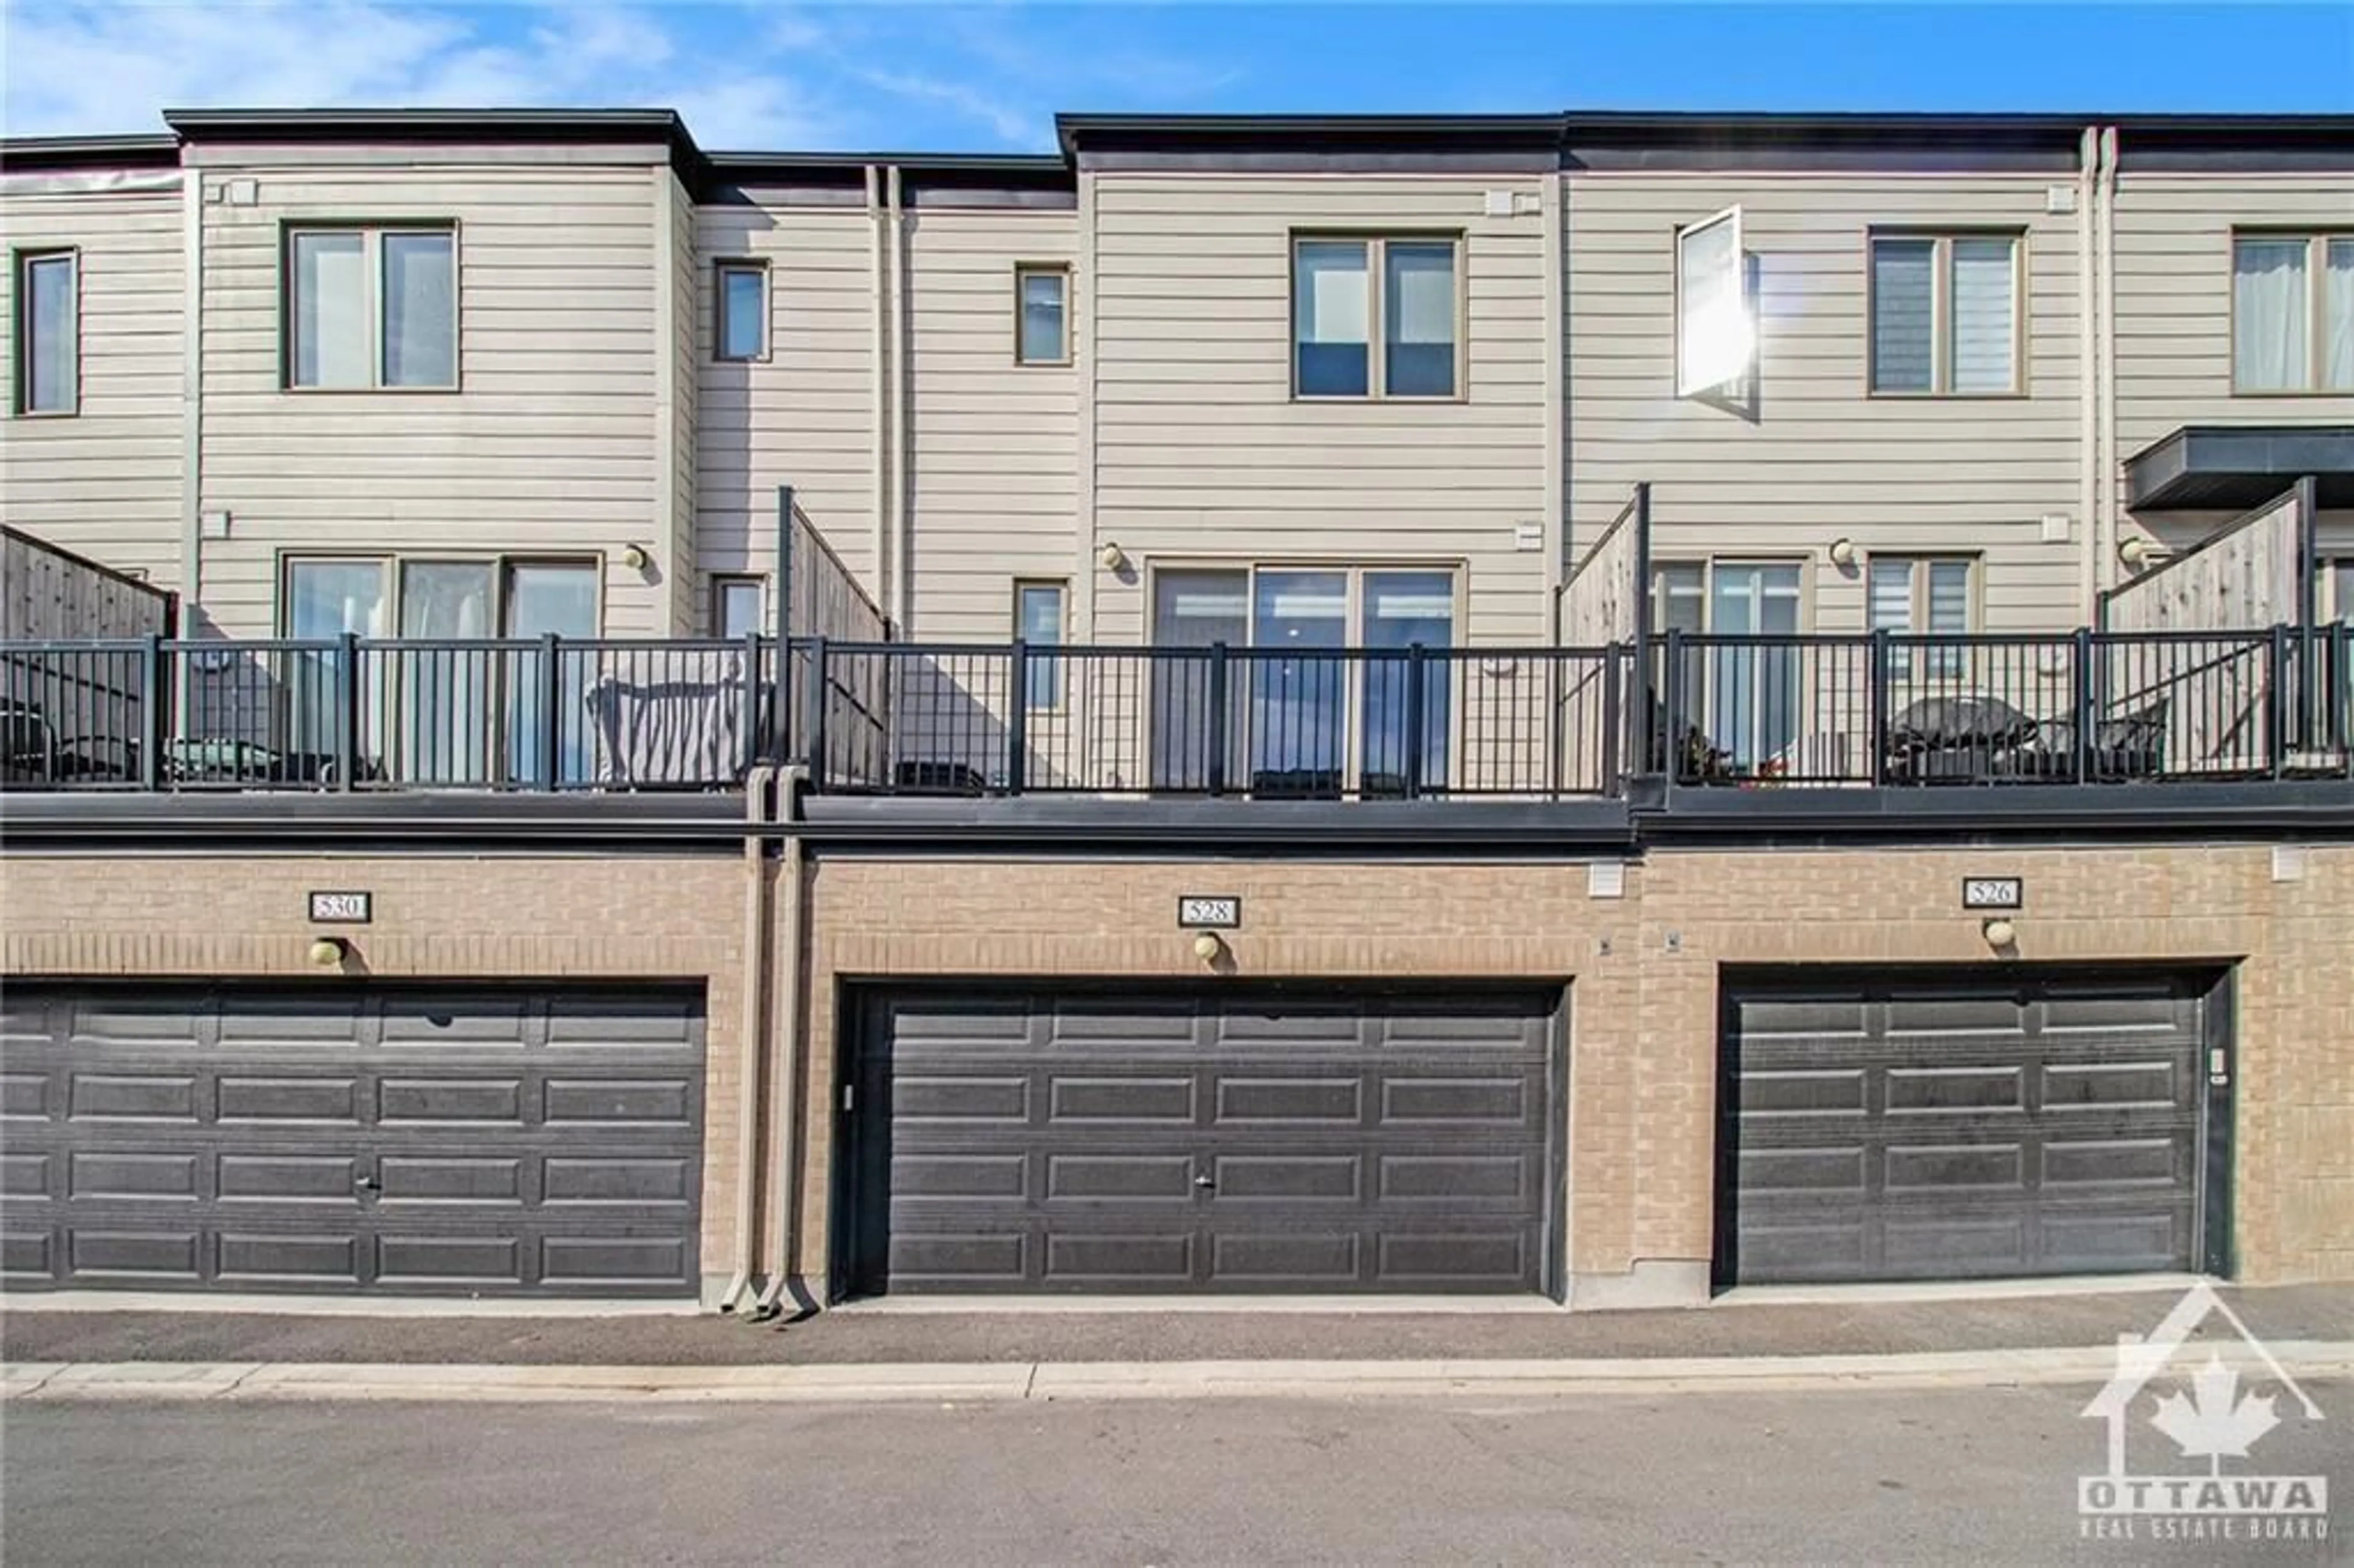 A pic from exterior of the house or condo for 528 OZAWA Pvt, Ottawa Ontario K1K 4Z9